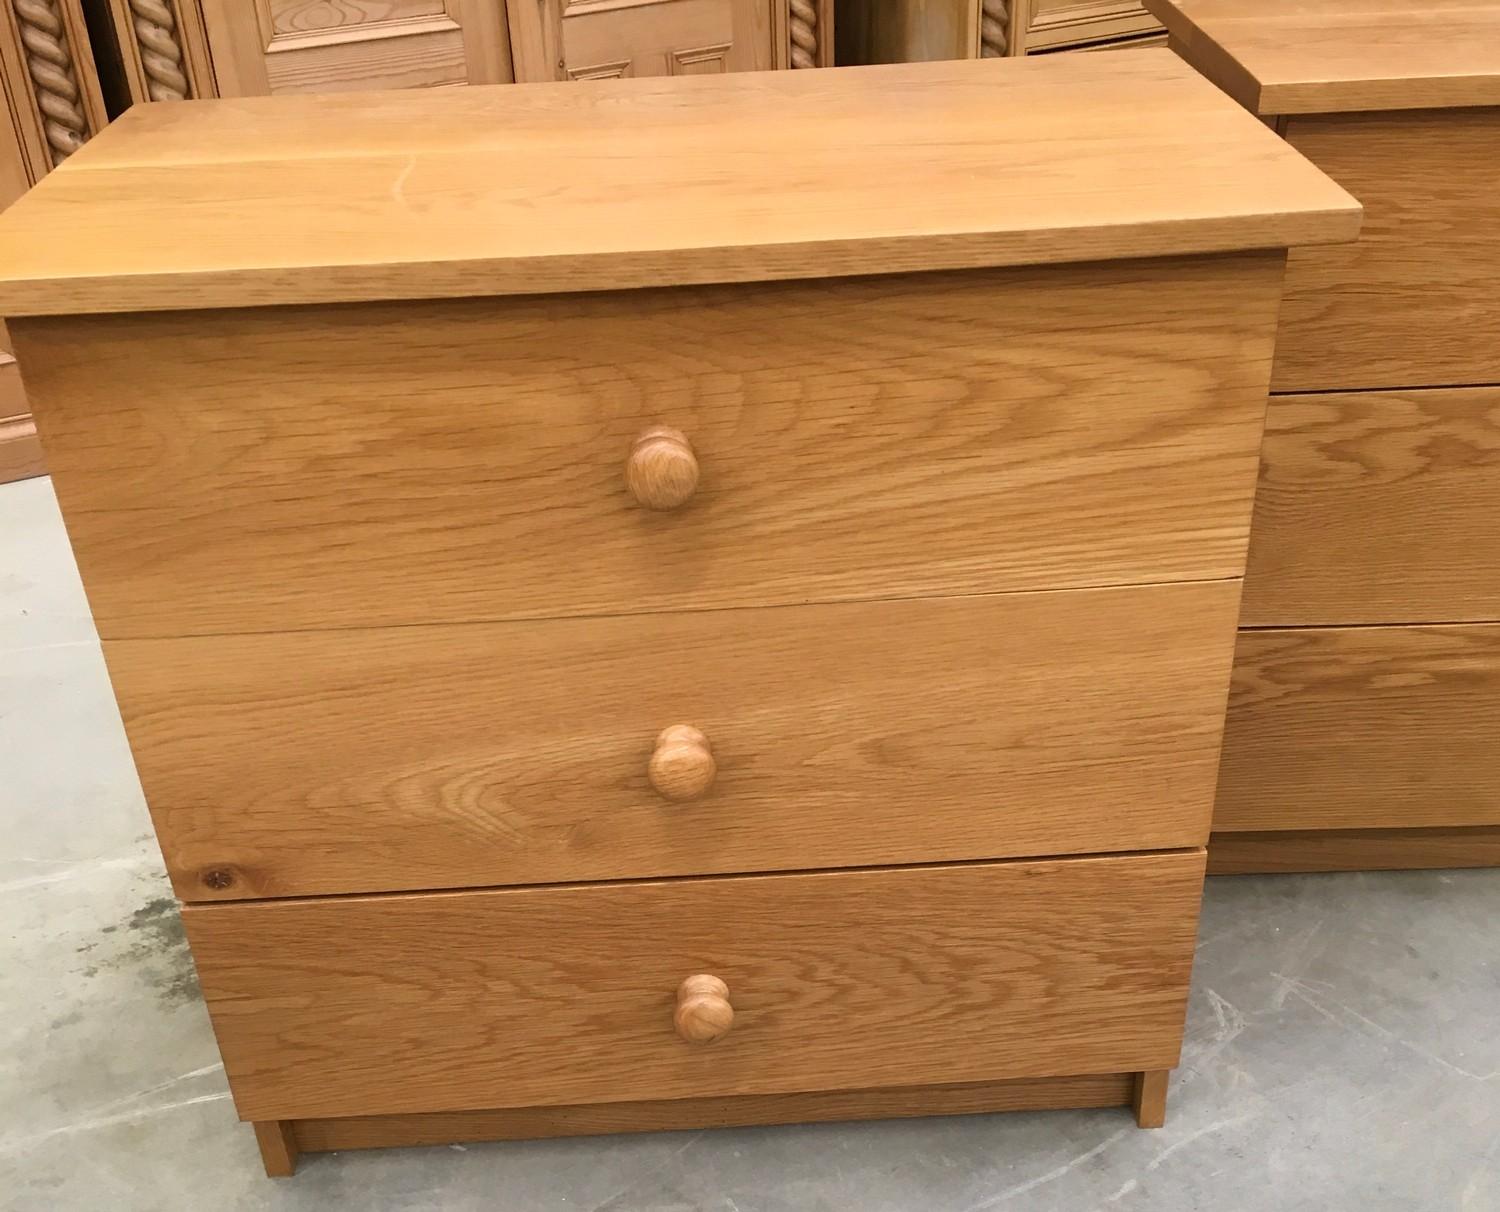 Pair solid oak 3 draw bedroom chest of draws with turned draw knobs ,72x77x44cm each - Image 2 of 7